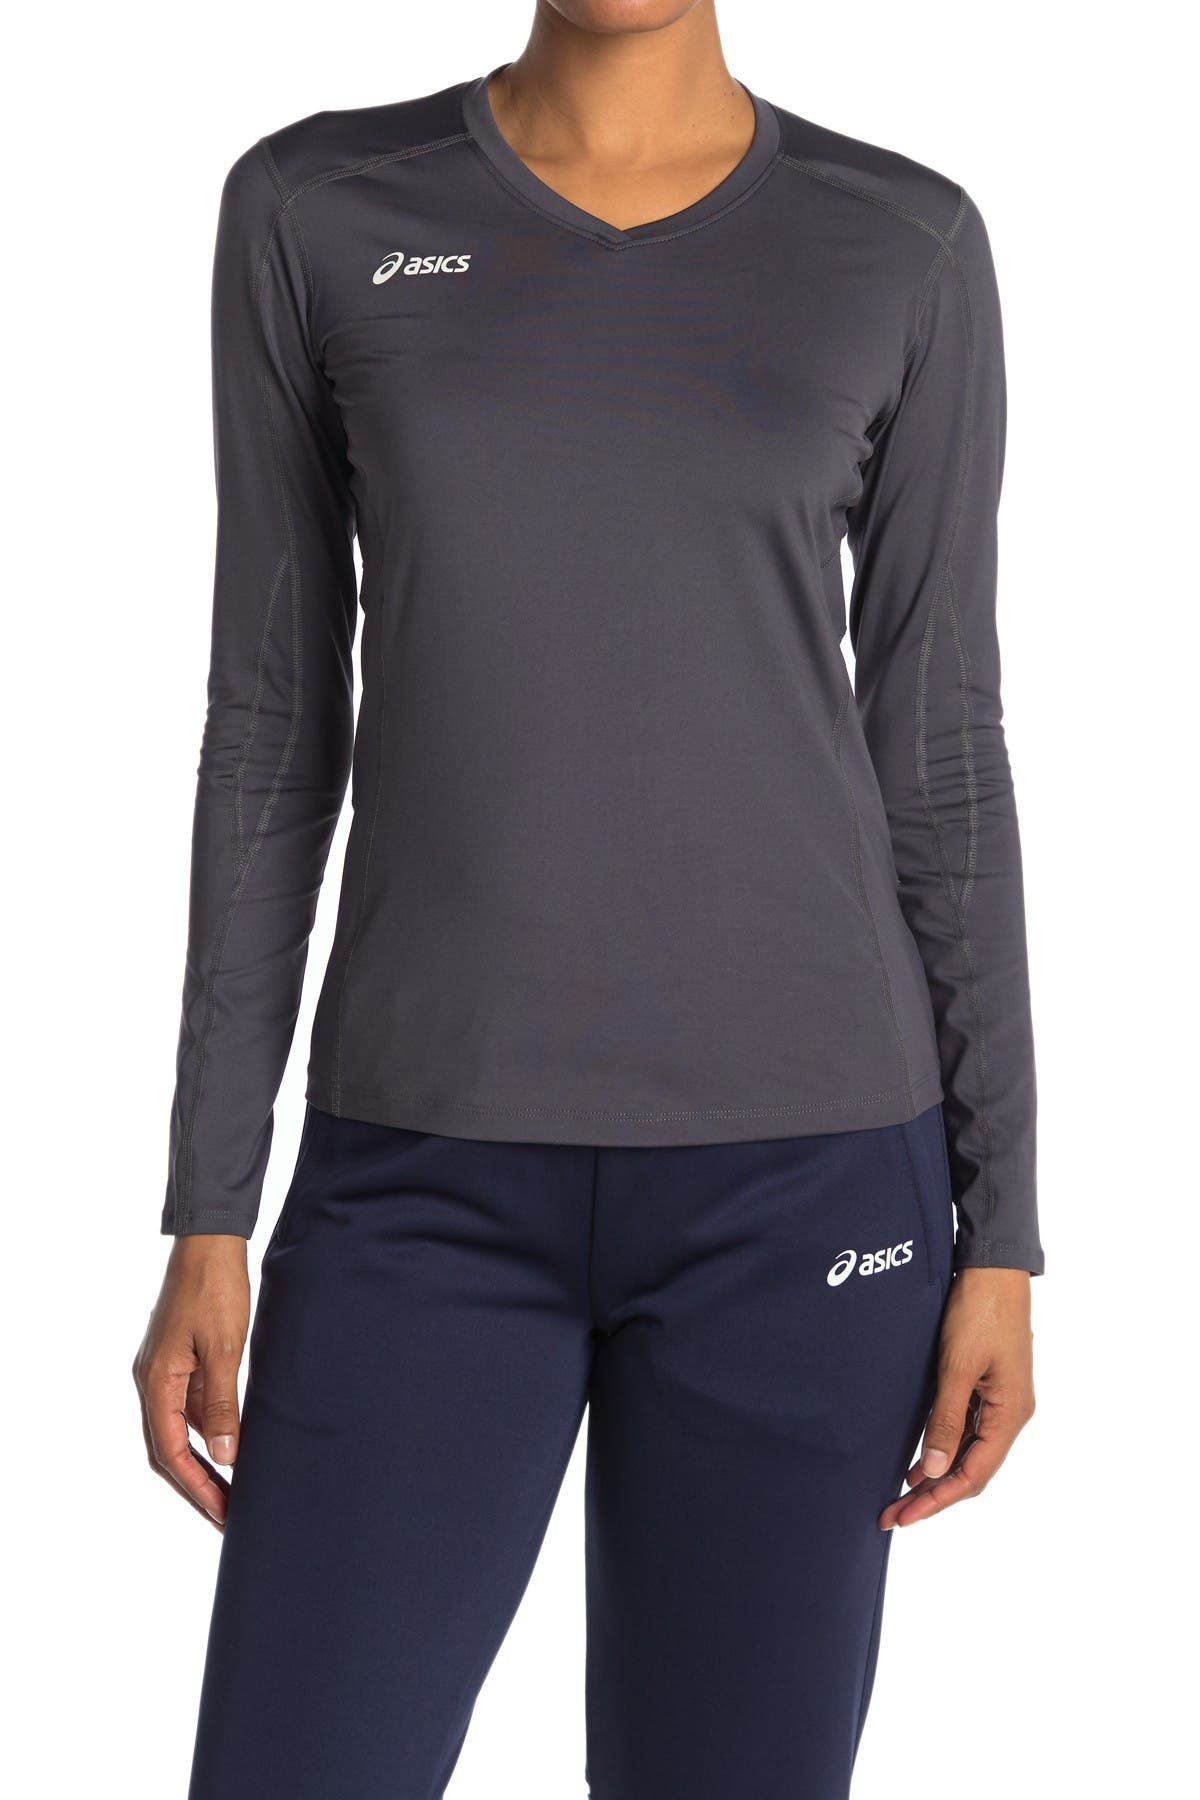 Asics Roll Shot Performance Jersey In Open Grey34